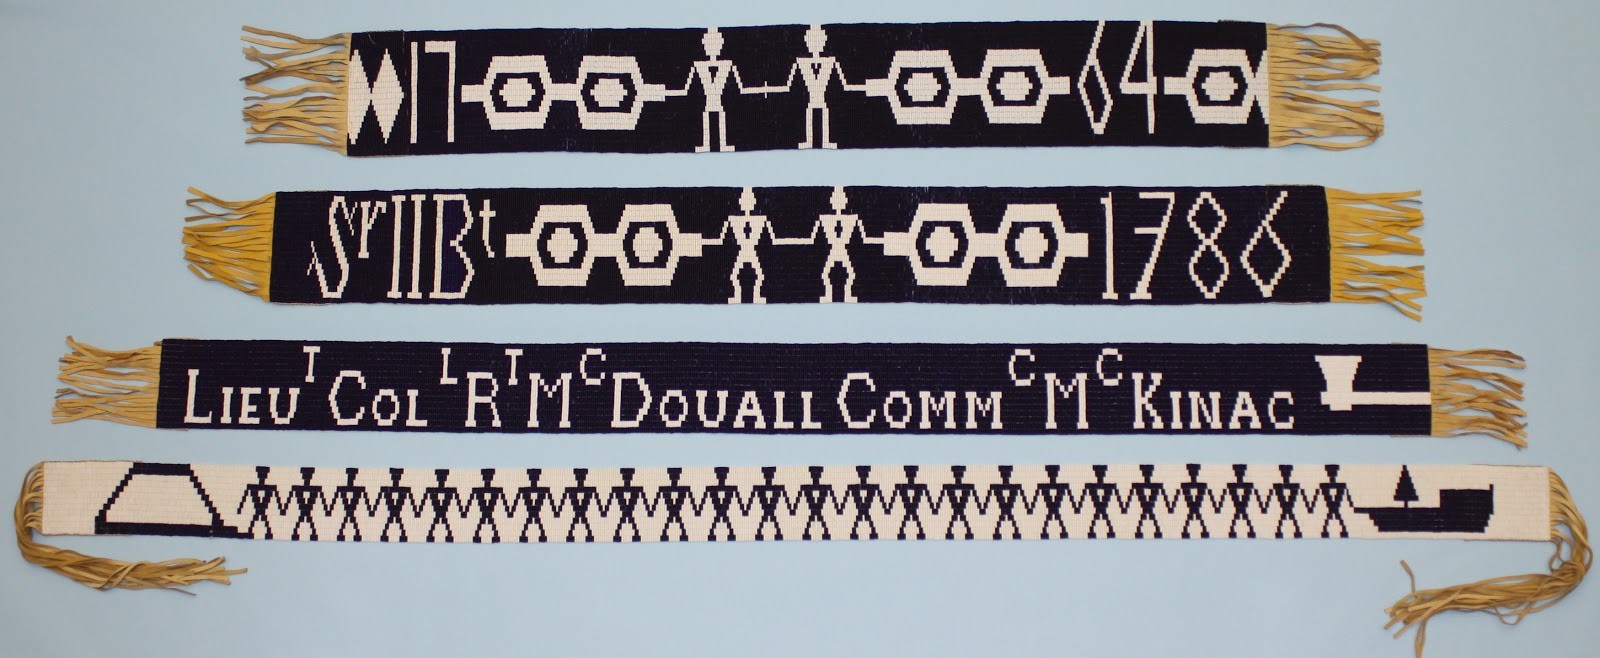 Four wampum belts from one family